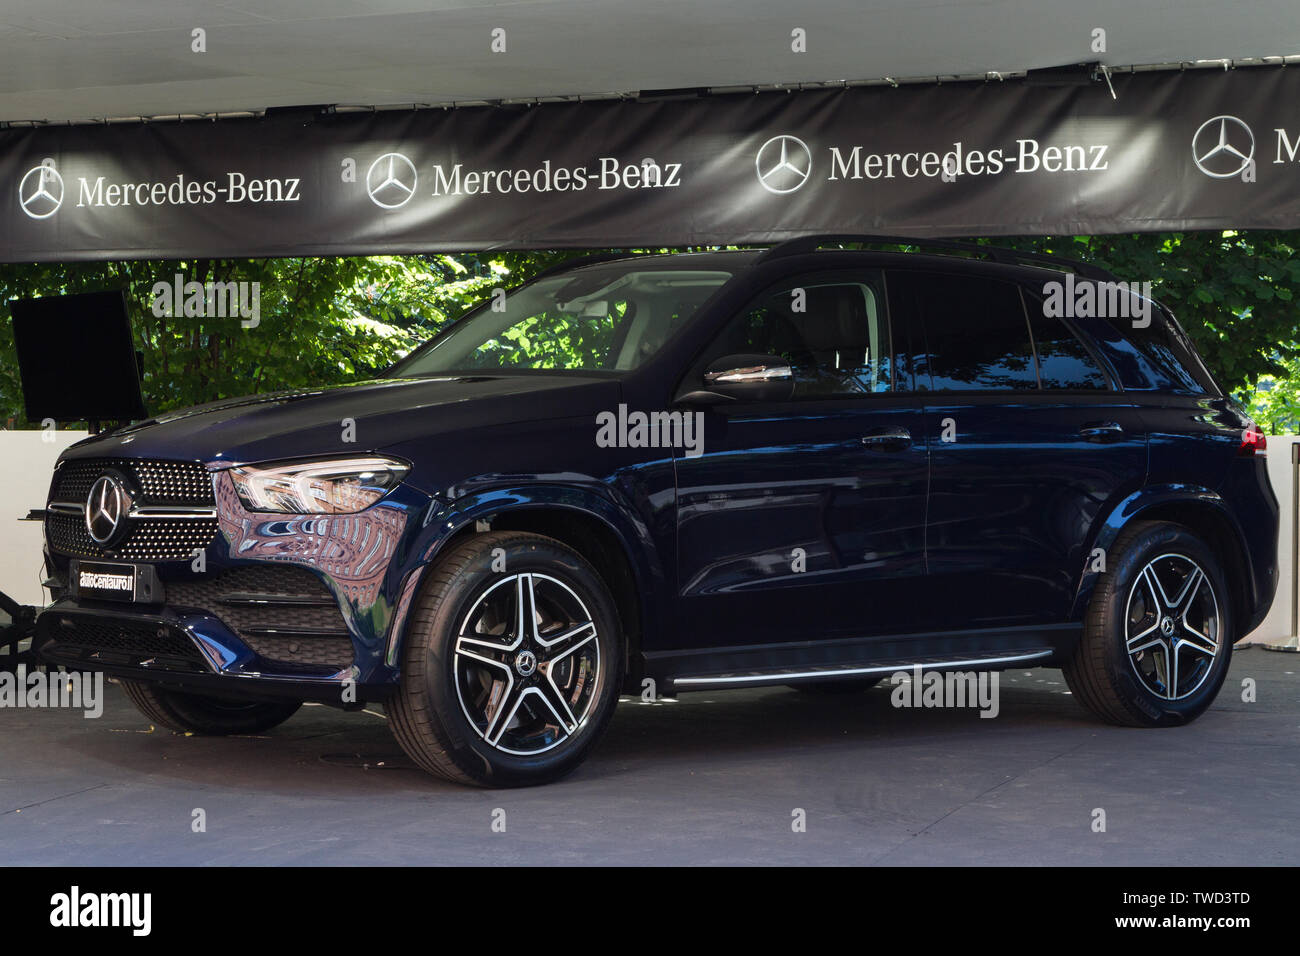 A Mercedes GLE 450 4MATIC EQ-Boost. 2019 edition of Parco Valentino car show hosts cars by many brands and car designers inside Valentino Park in Torino, Italy. Stock Photo